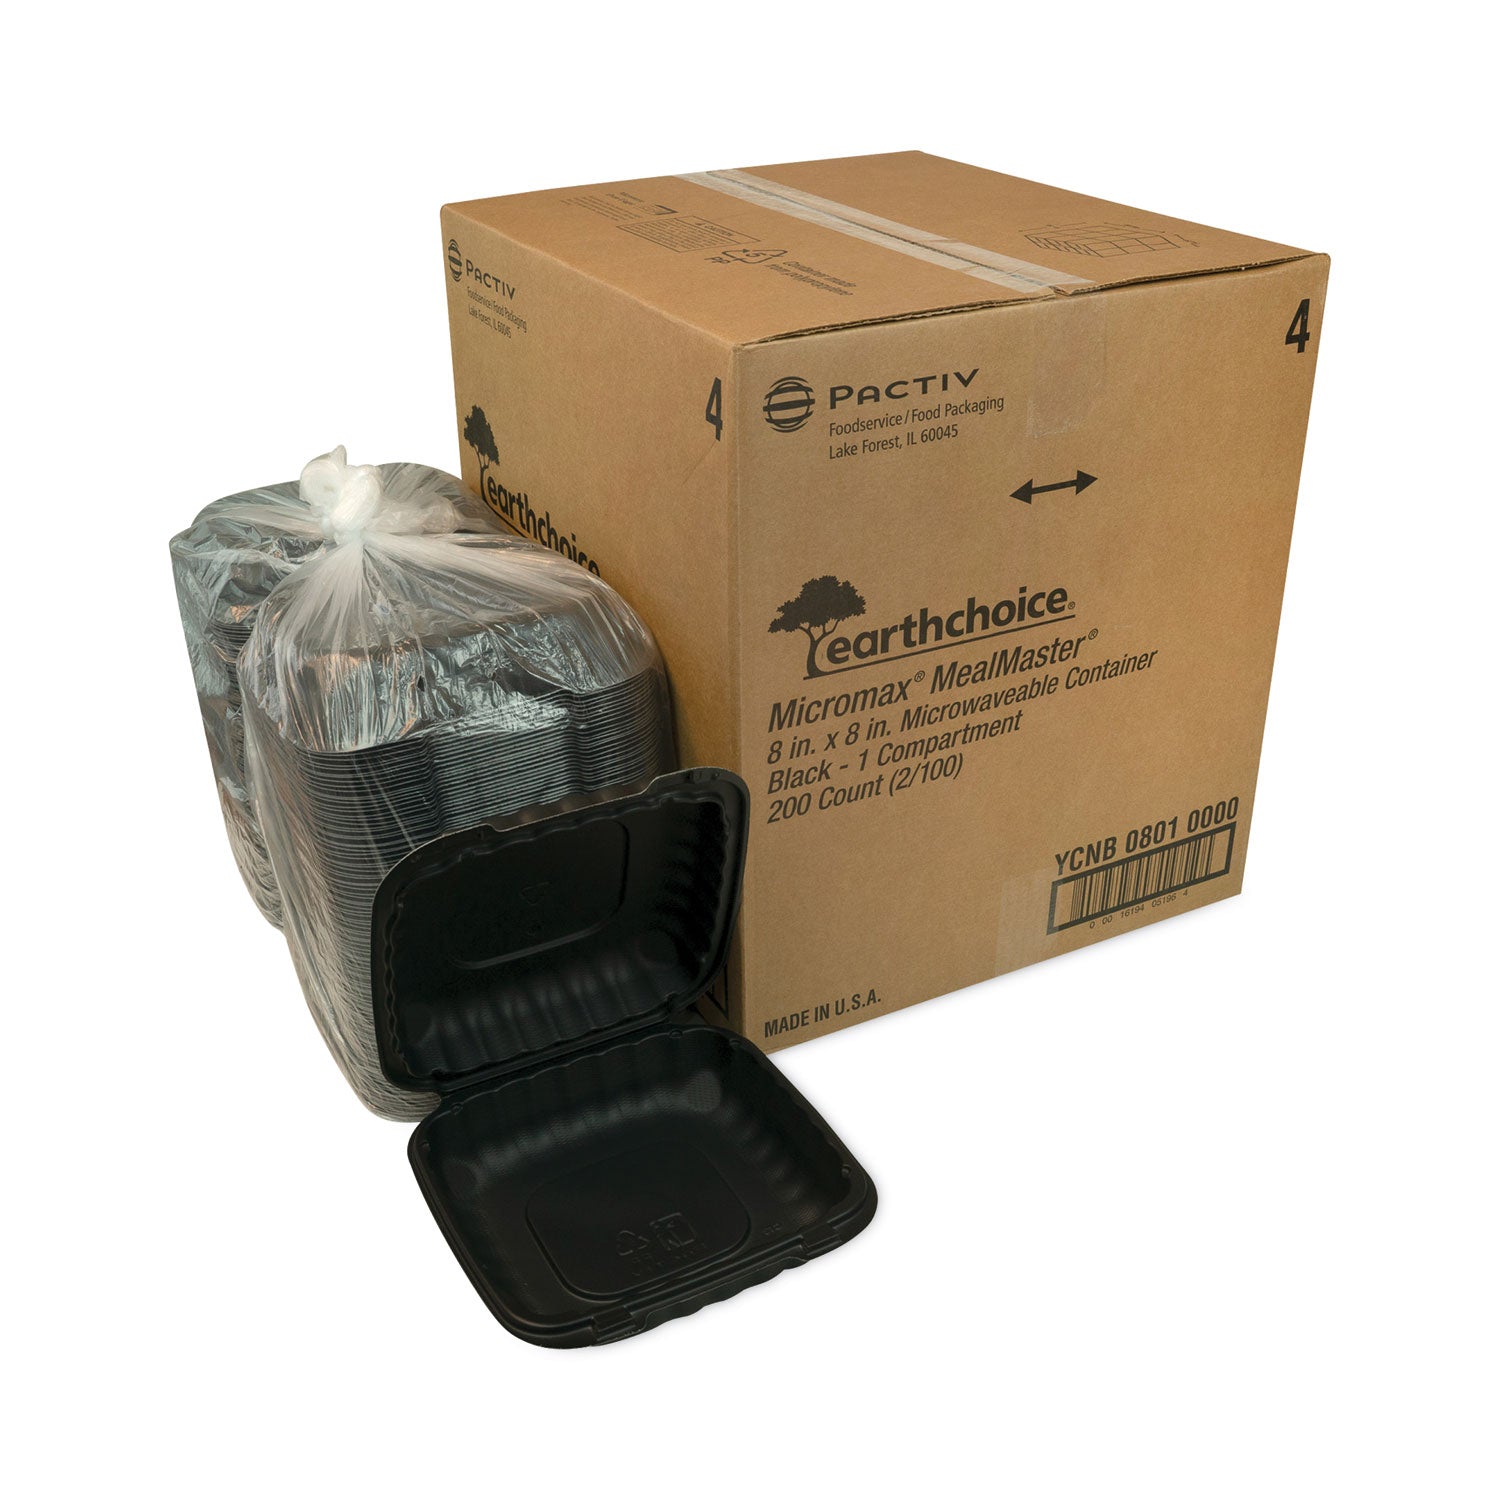 earthchoice-smartlock-microwavable-mfpp-hinged-lid-container-831-x-835-x-31-black-plastic-200-carton_pctycnb08010000 - 5